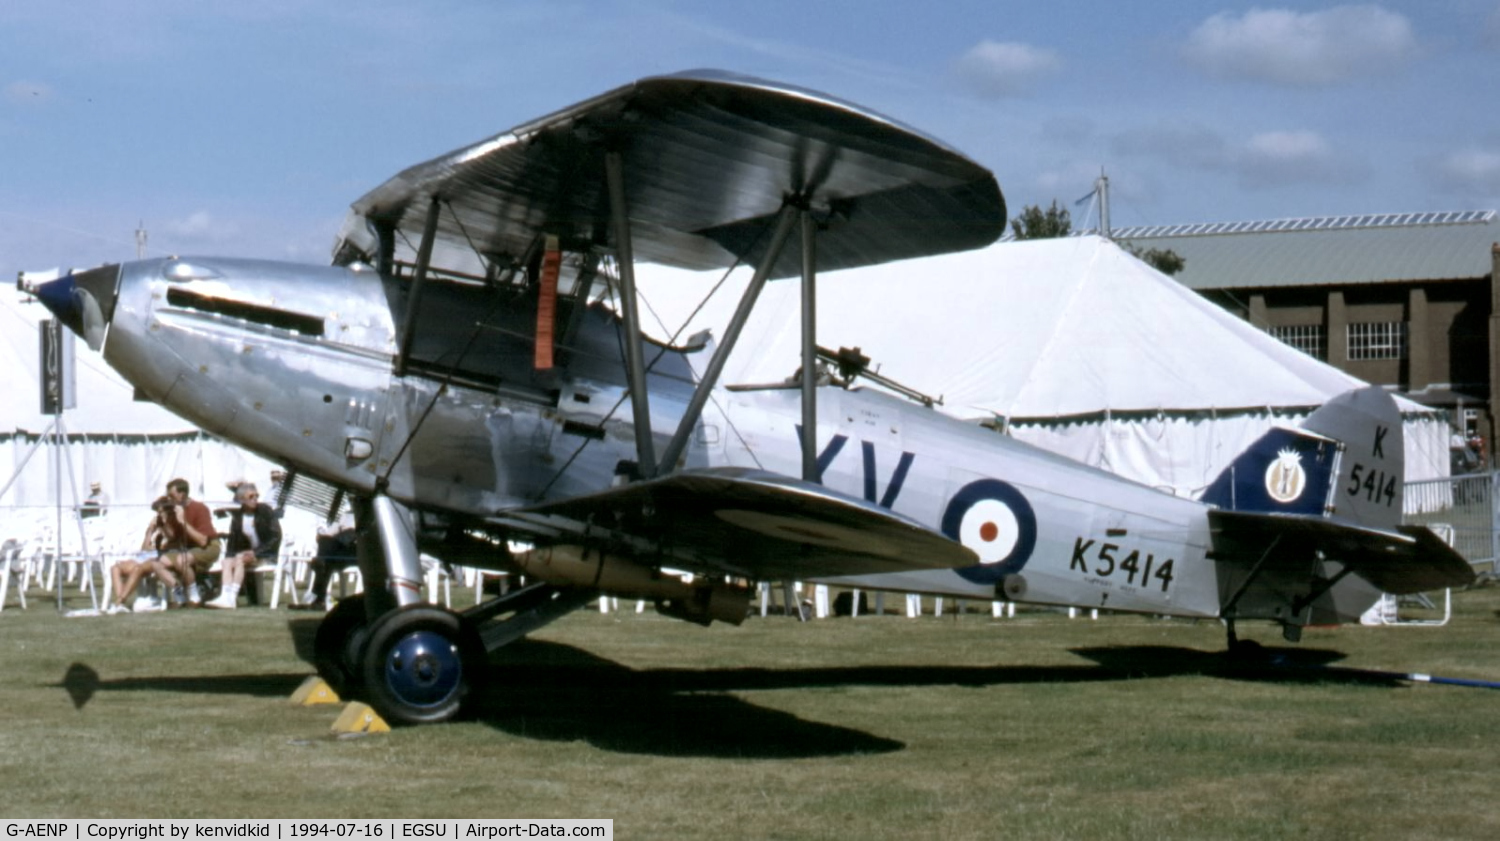 G-AENP, 1935 Hawker Hind C/N 41H/81902, At the 1994 Flying Legends Air Show.